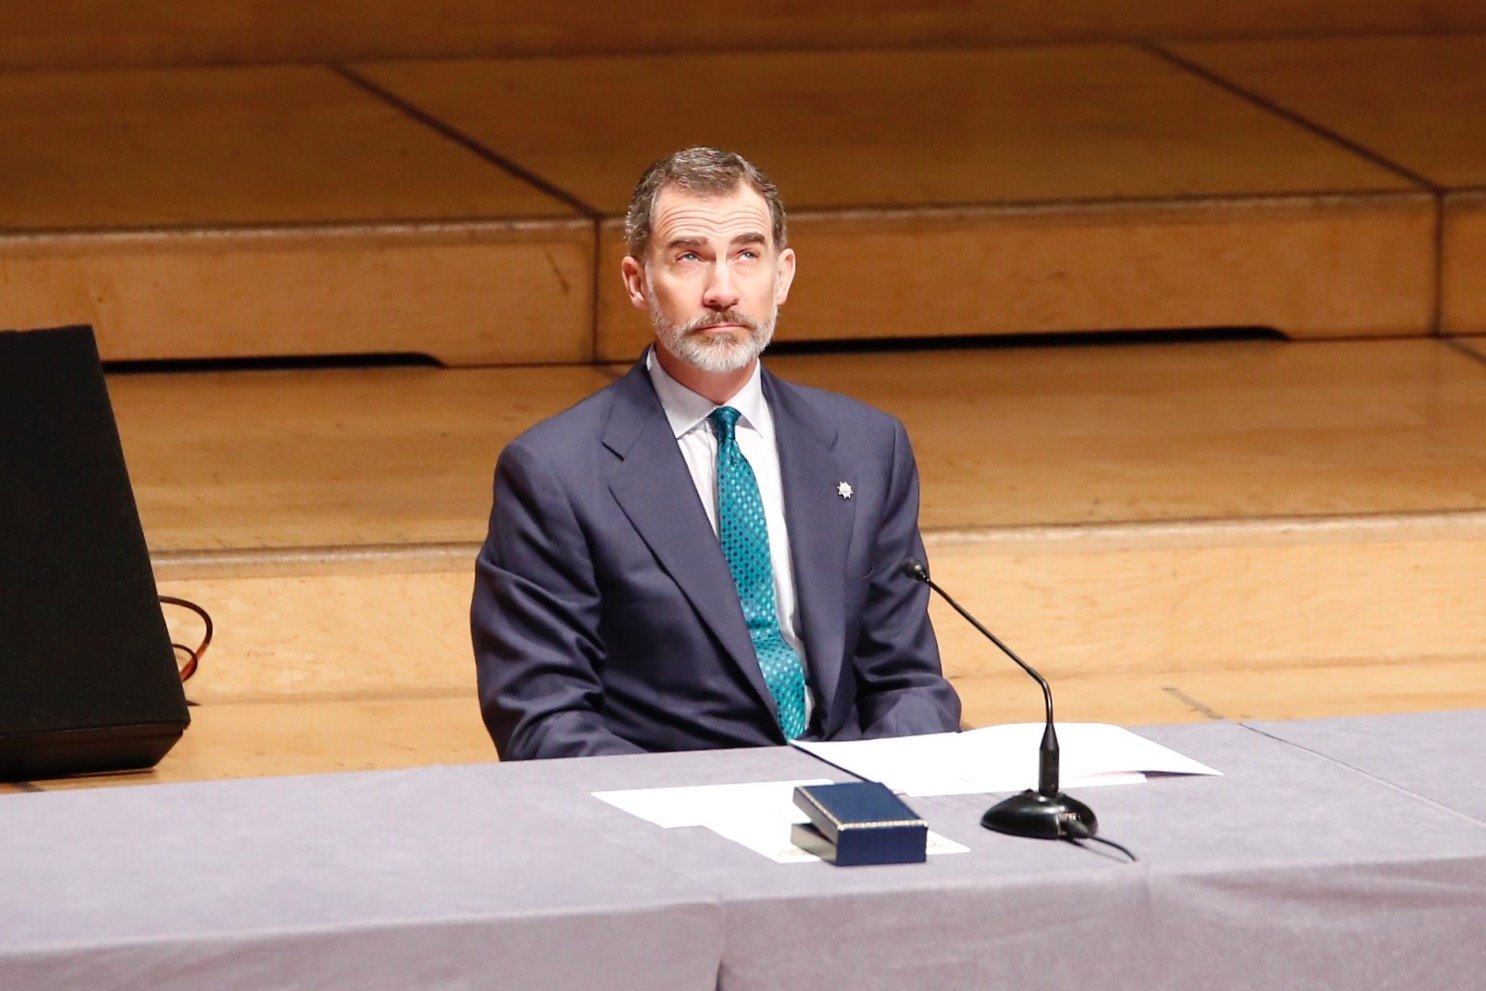 Spanish king avoids European rejection of extradition requests at a frosty event in Barcelona